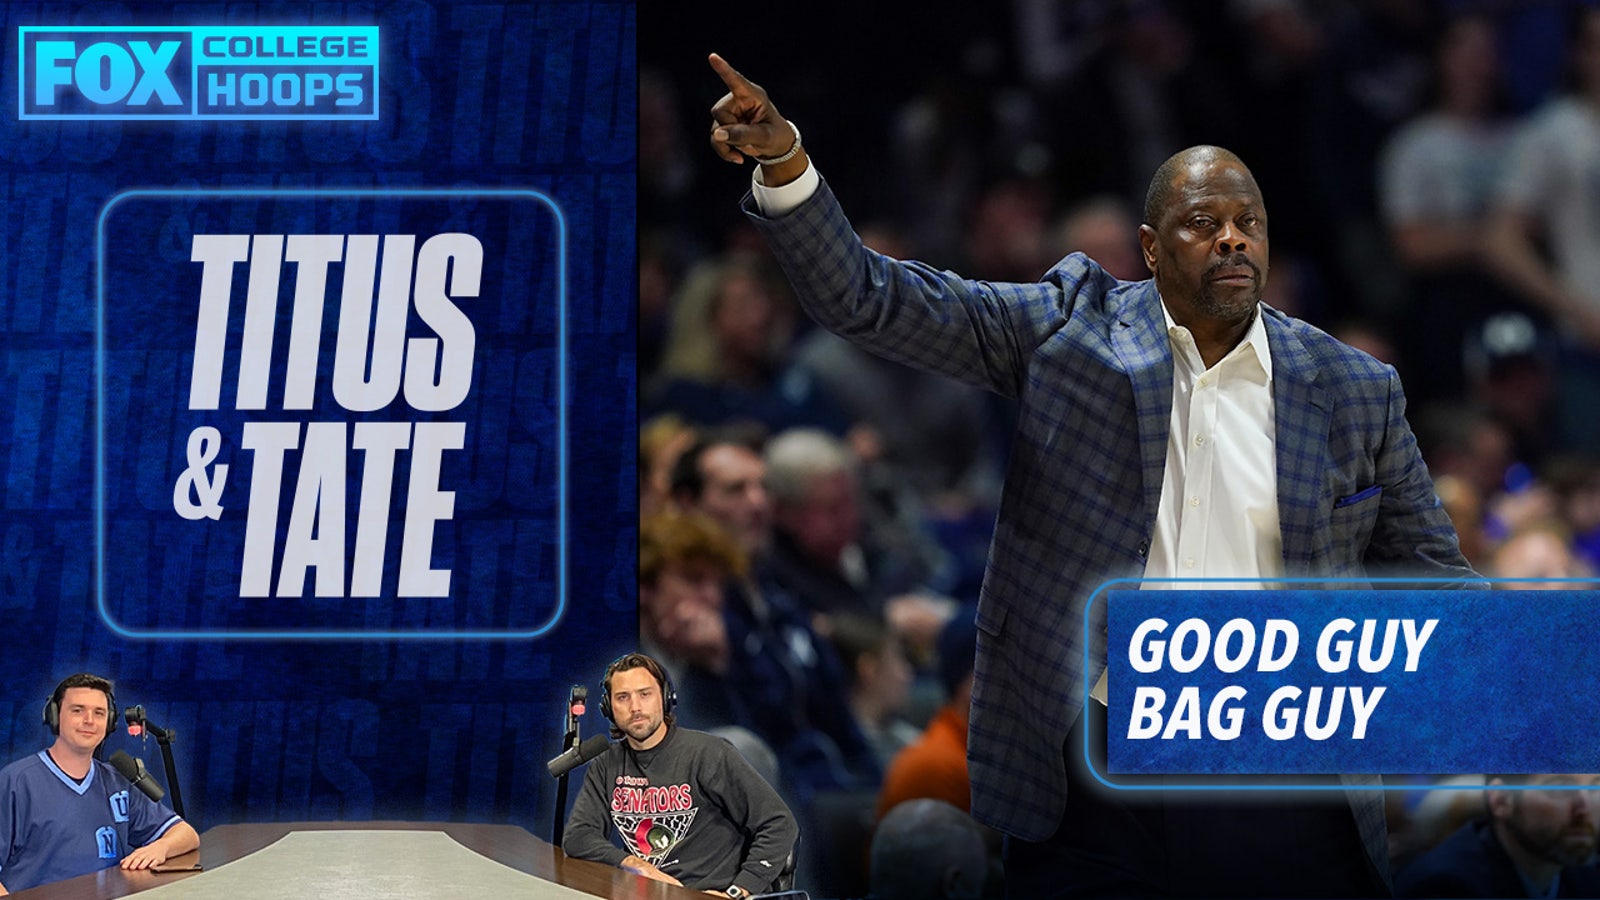 Patrick Ewing leads The Good Guy/Bag Guy of the Week